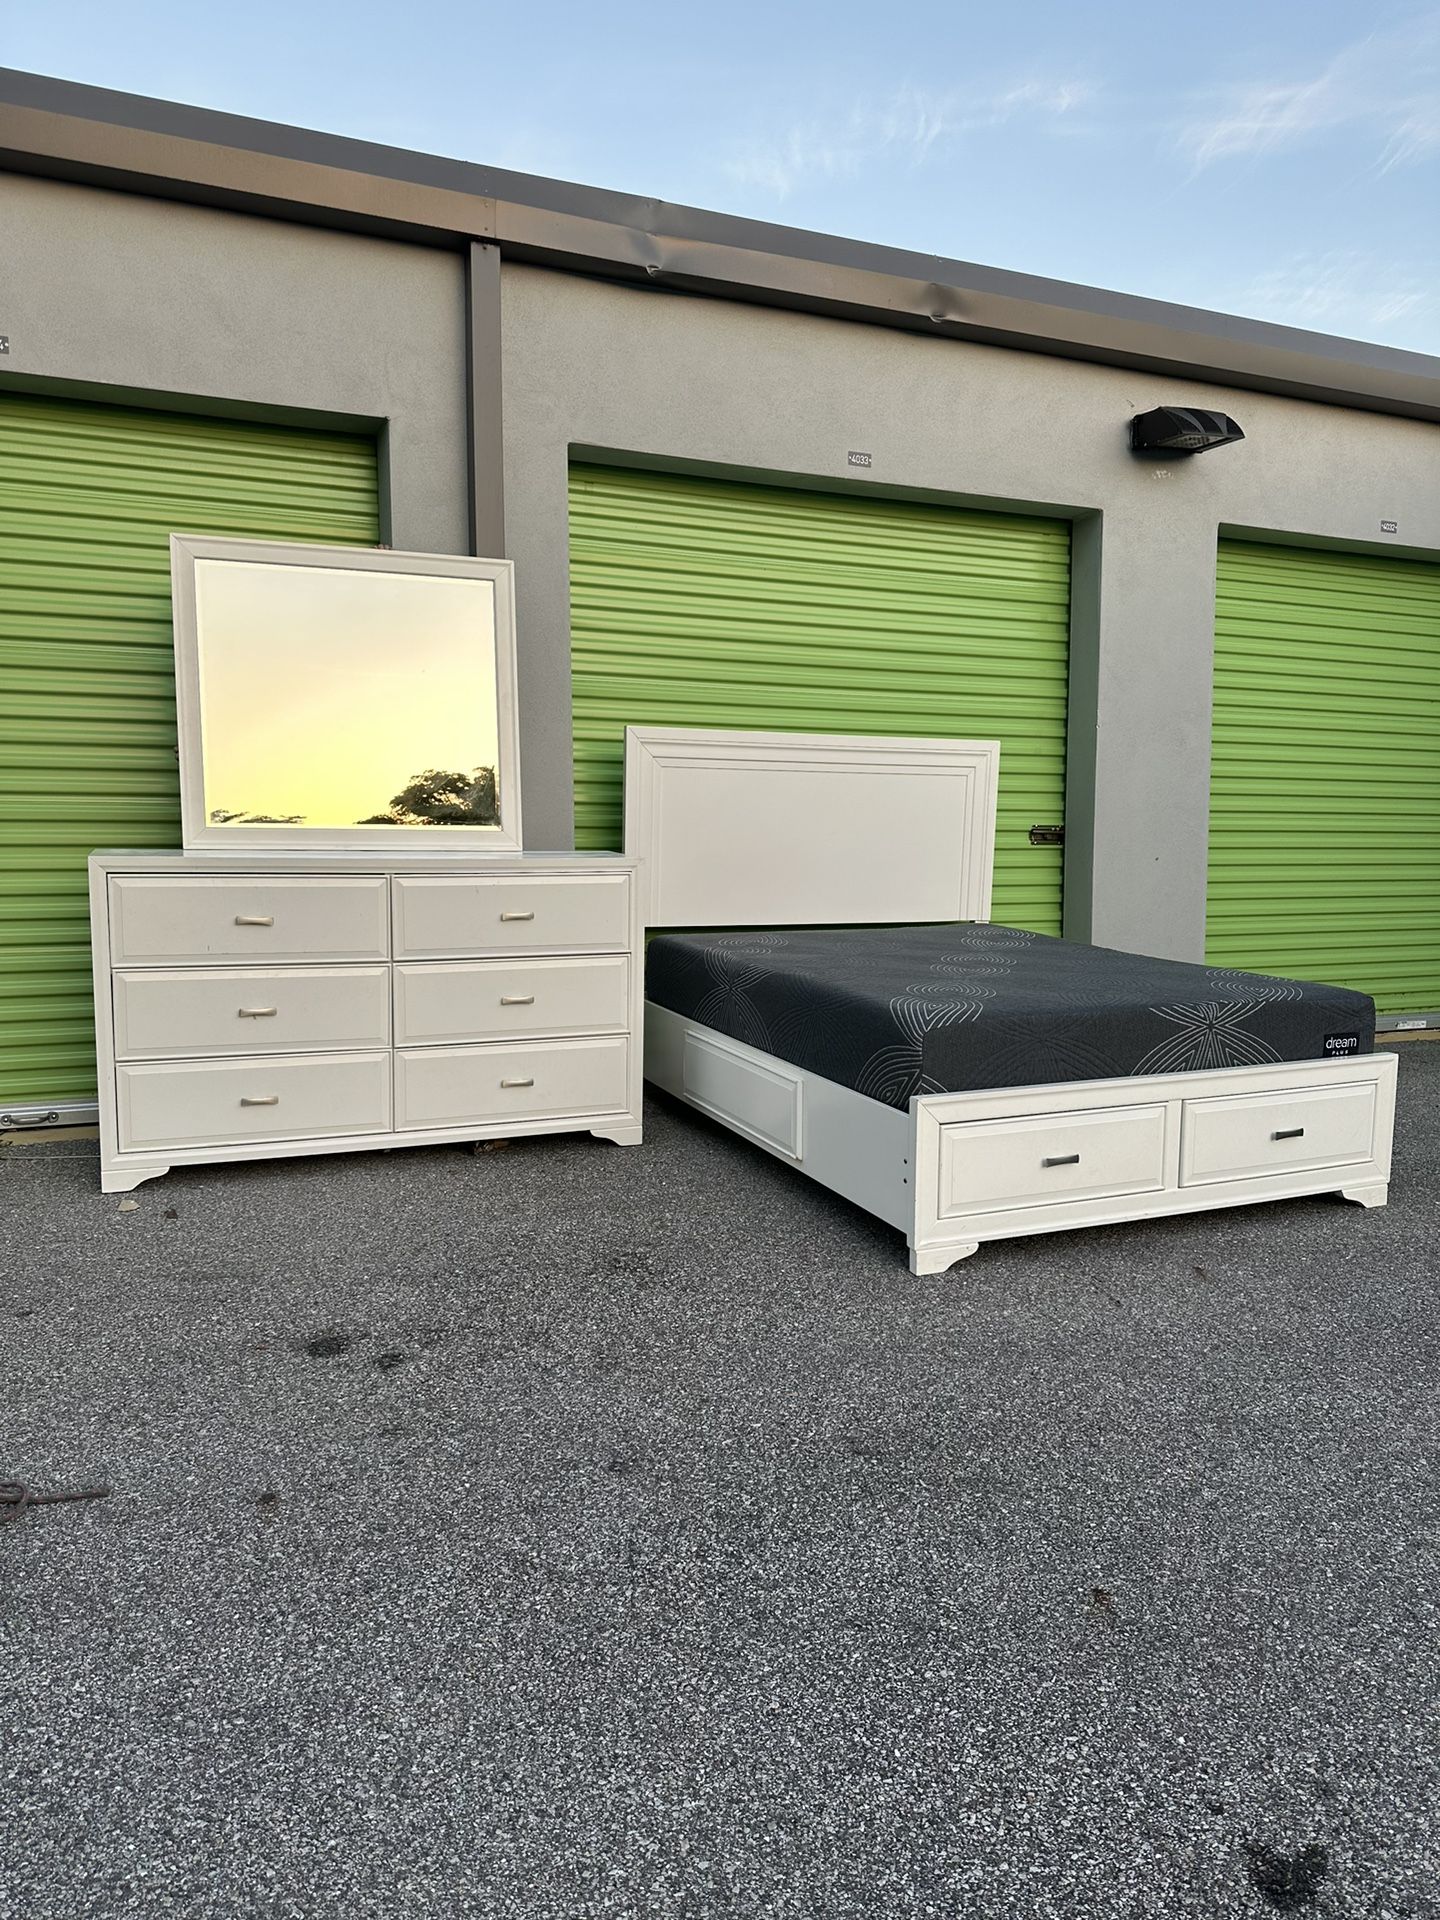 Queen bedroom srt (FREE DELIVERY AND SETUP)